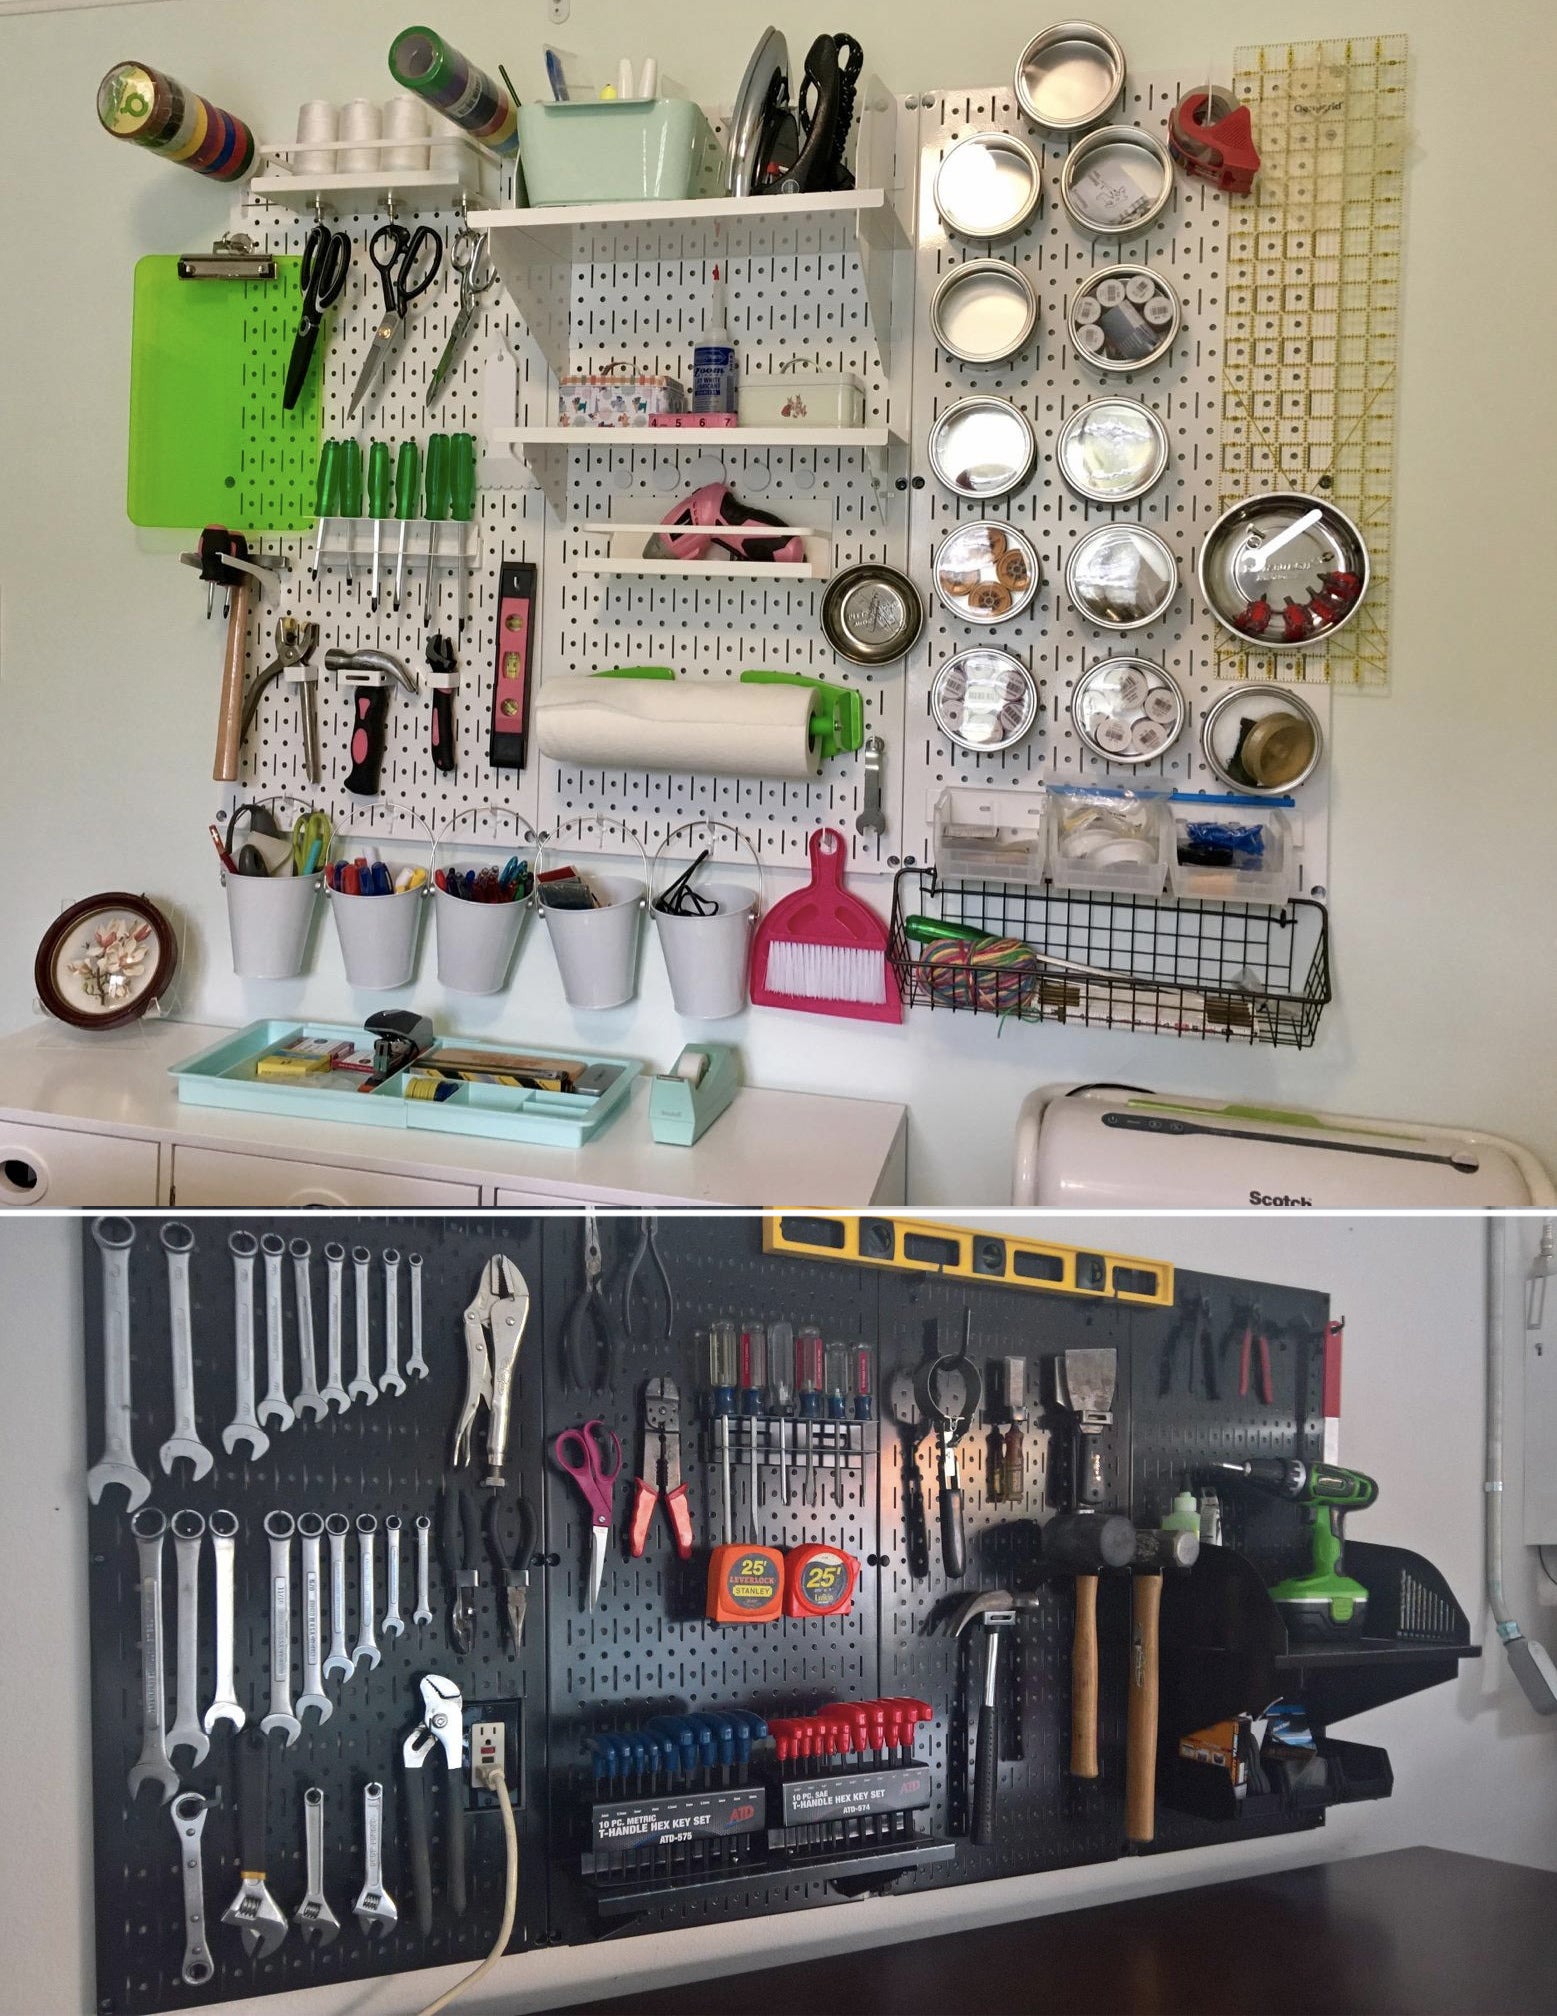 two reviewers setups: one in white with scissors, sewing notions, a glue gun, ribbon, etc., another in black with wrenches, hammers, mallets, screwdrivers, etc. 